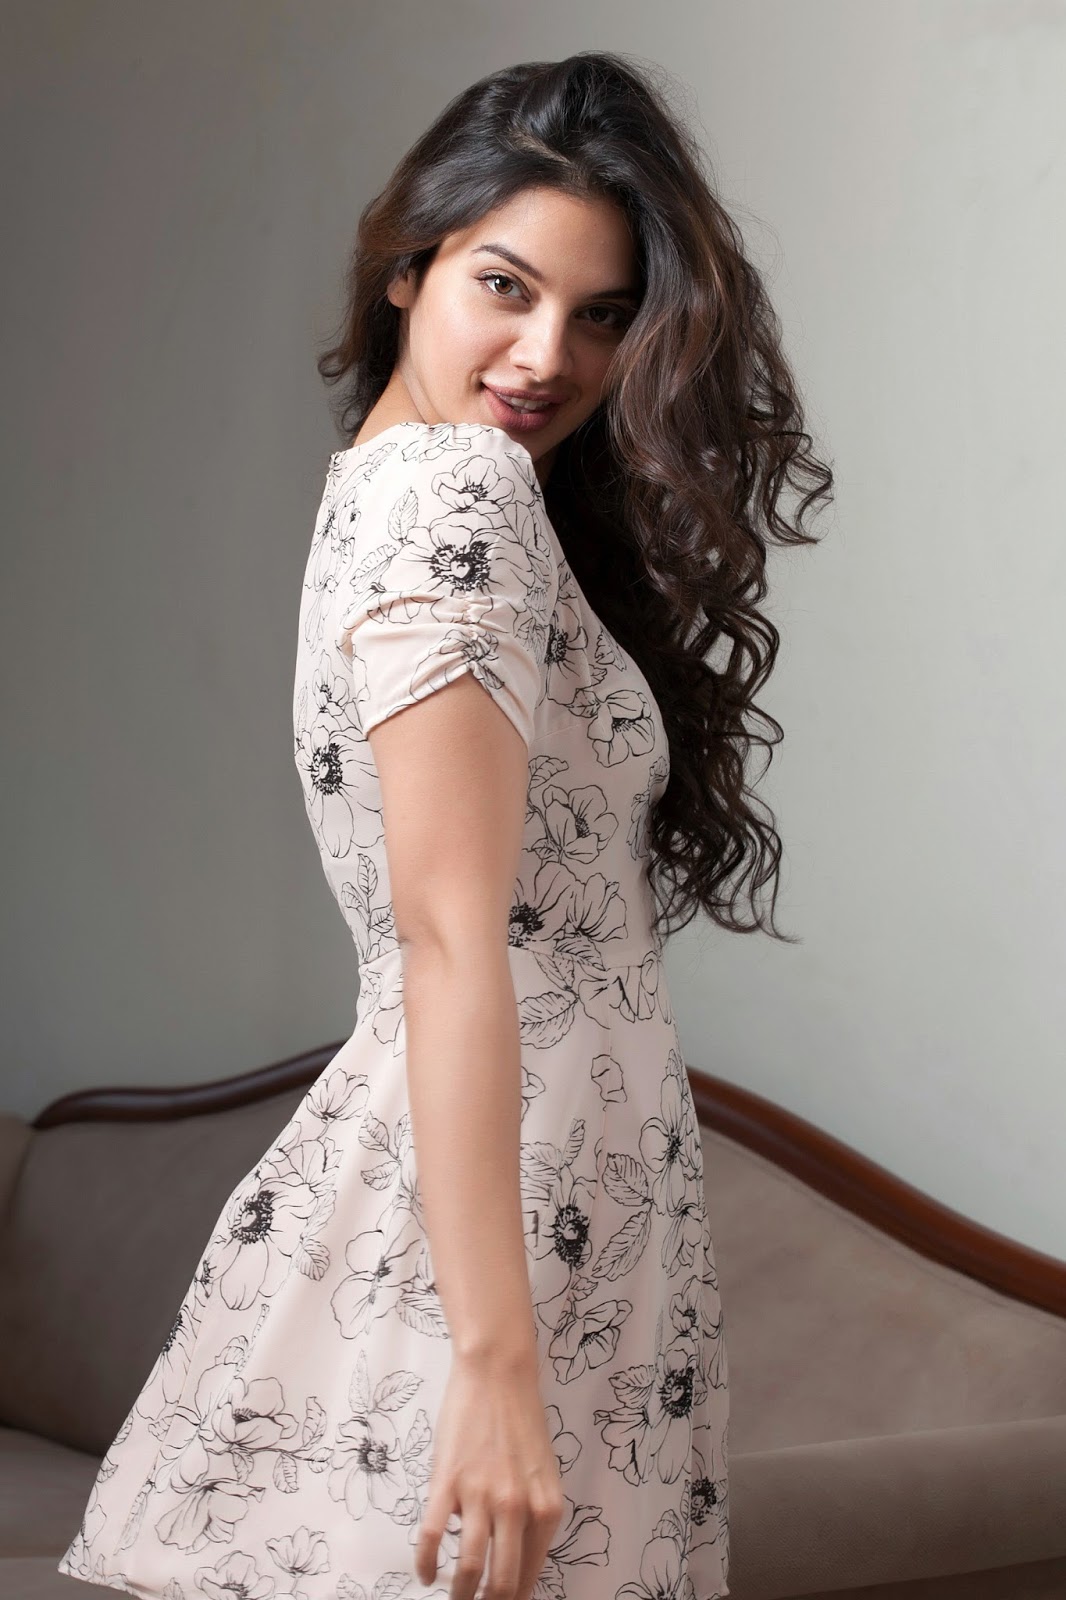 Beauty Galore HD : Tanya Hope Super Cute Face And Hot In Mini Skirt For ...